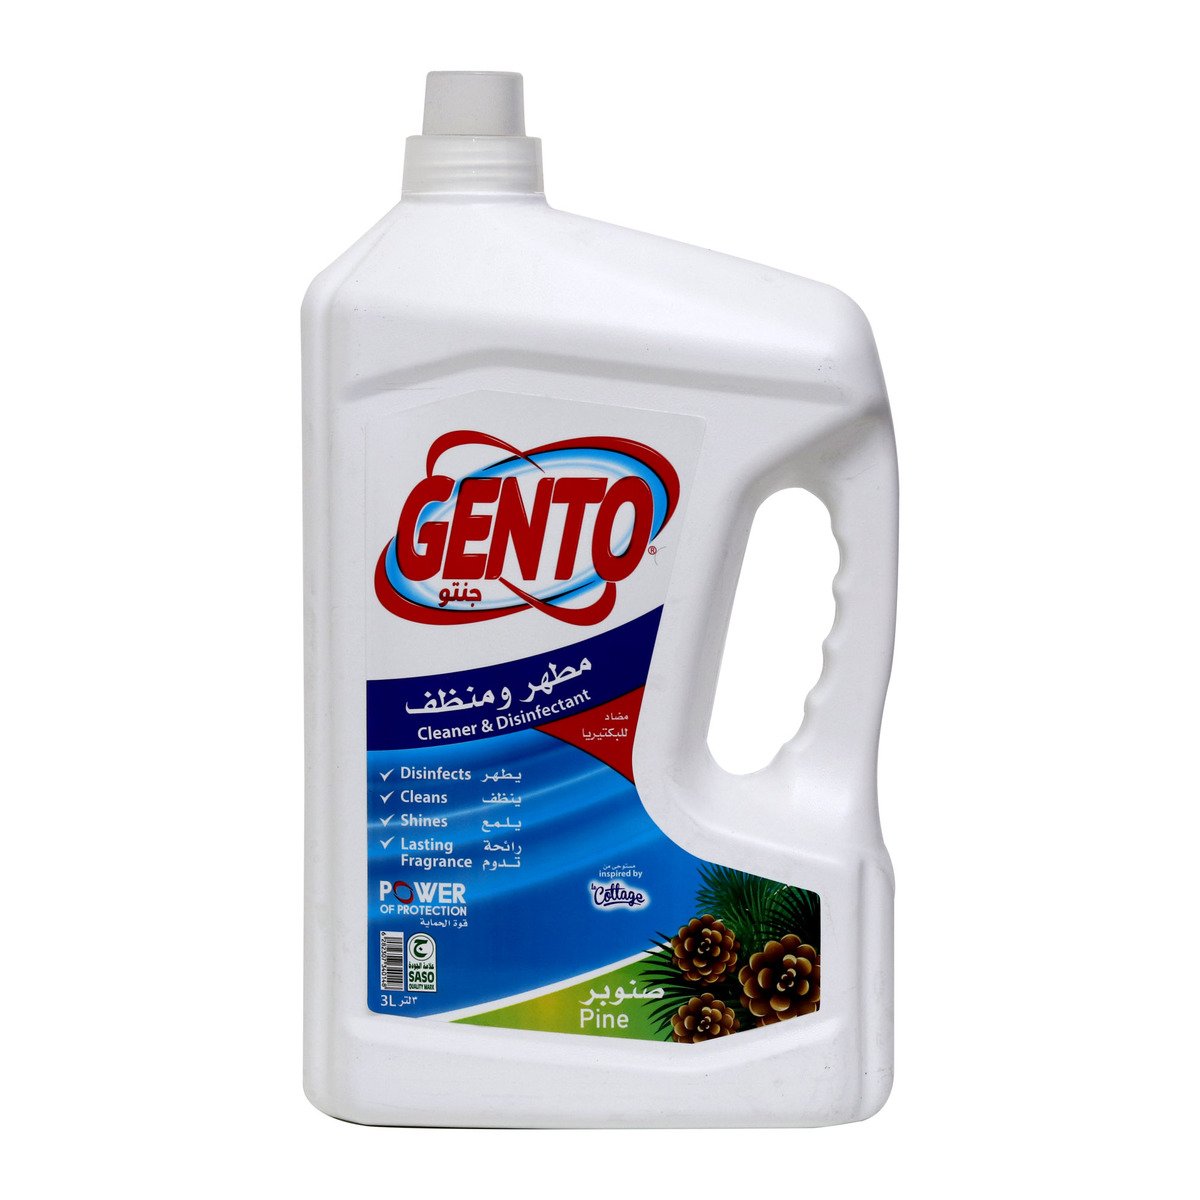 Gento Cleaner & Disinfectant Pine 3Litre